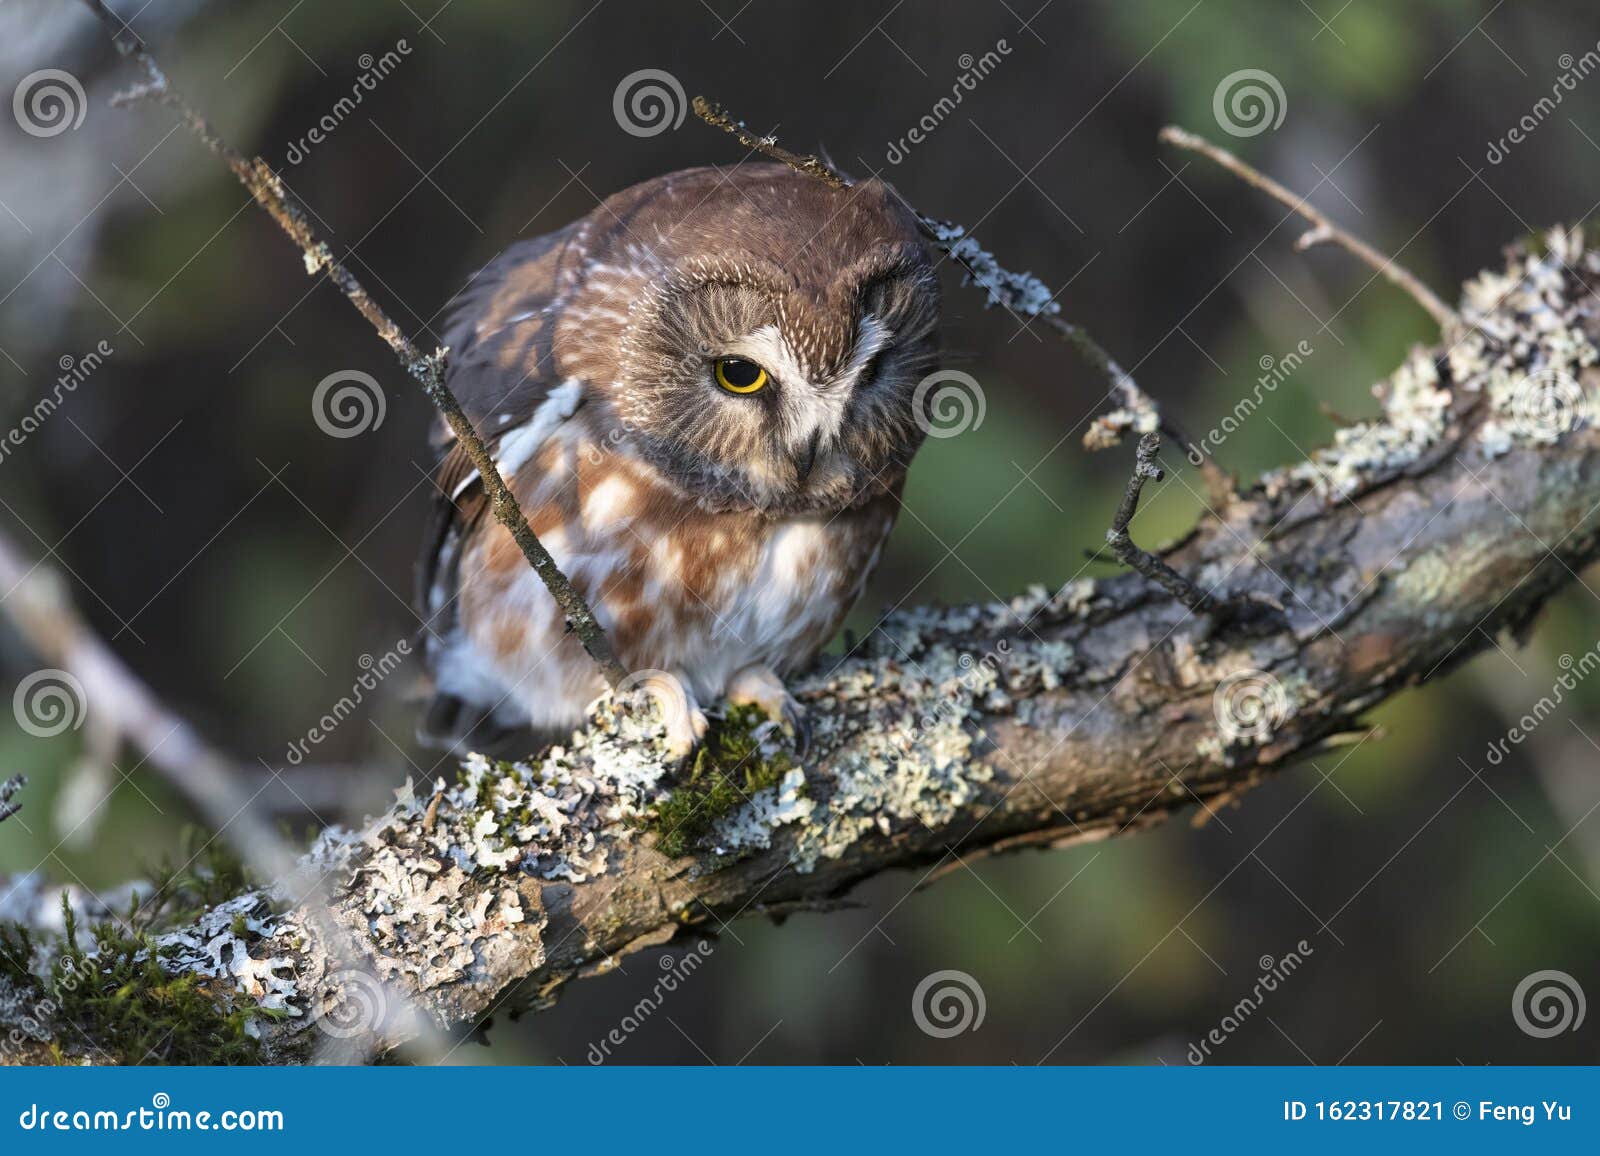 northern saw whet owl